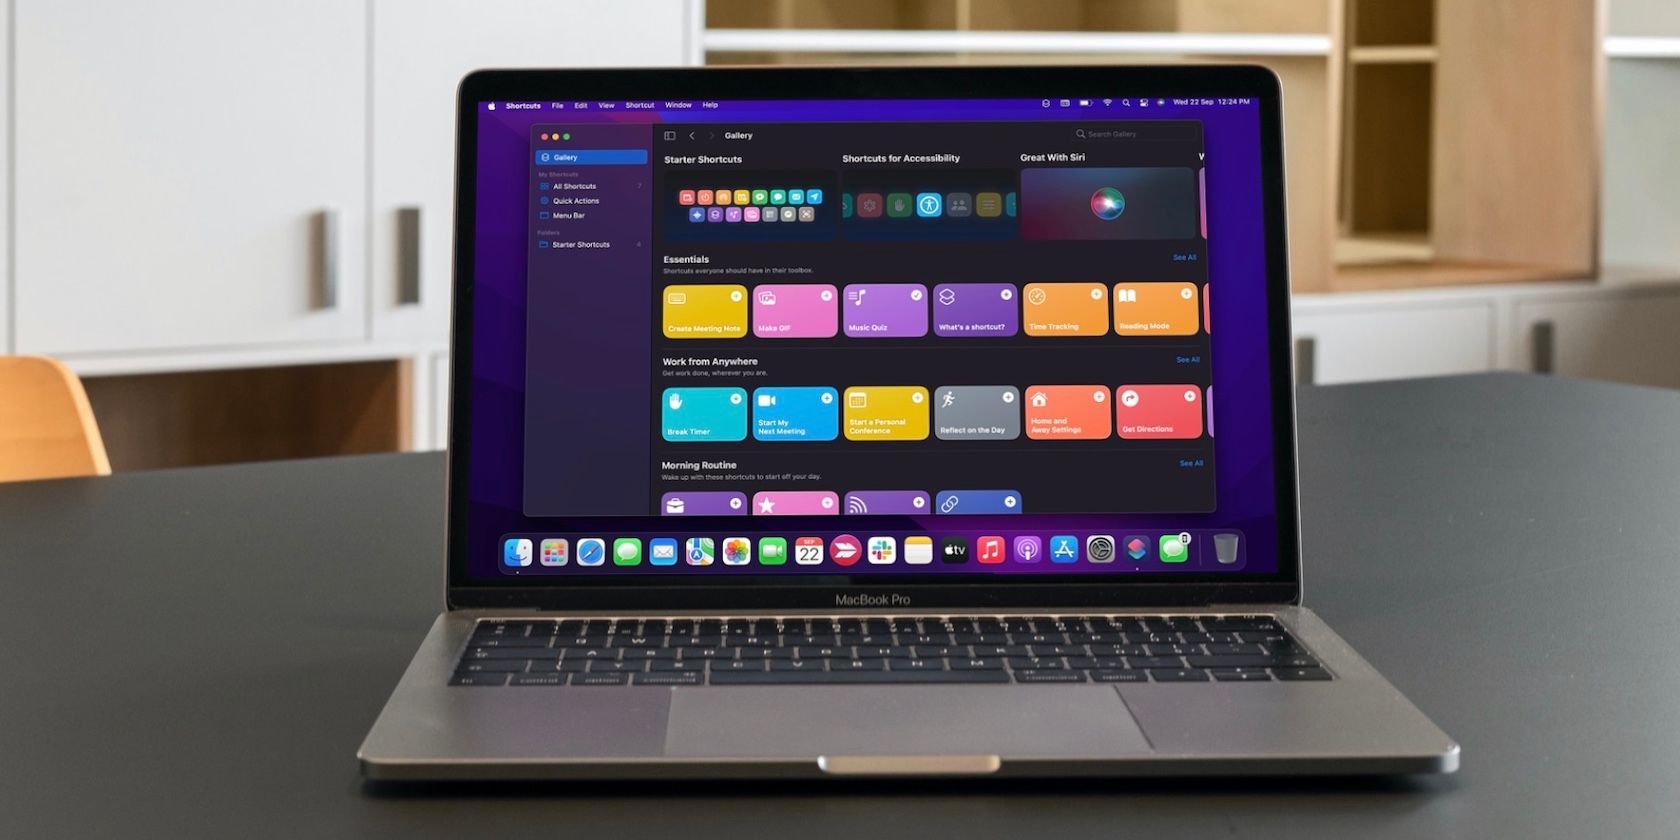 7 Useful Ways to Use the Shortcuts App on Your Mac